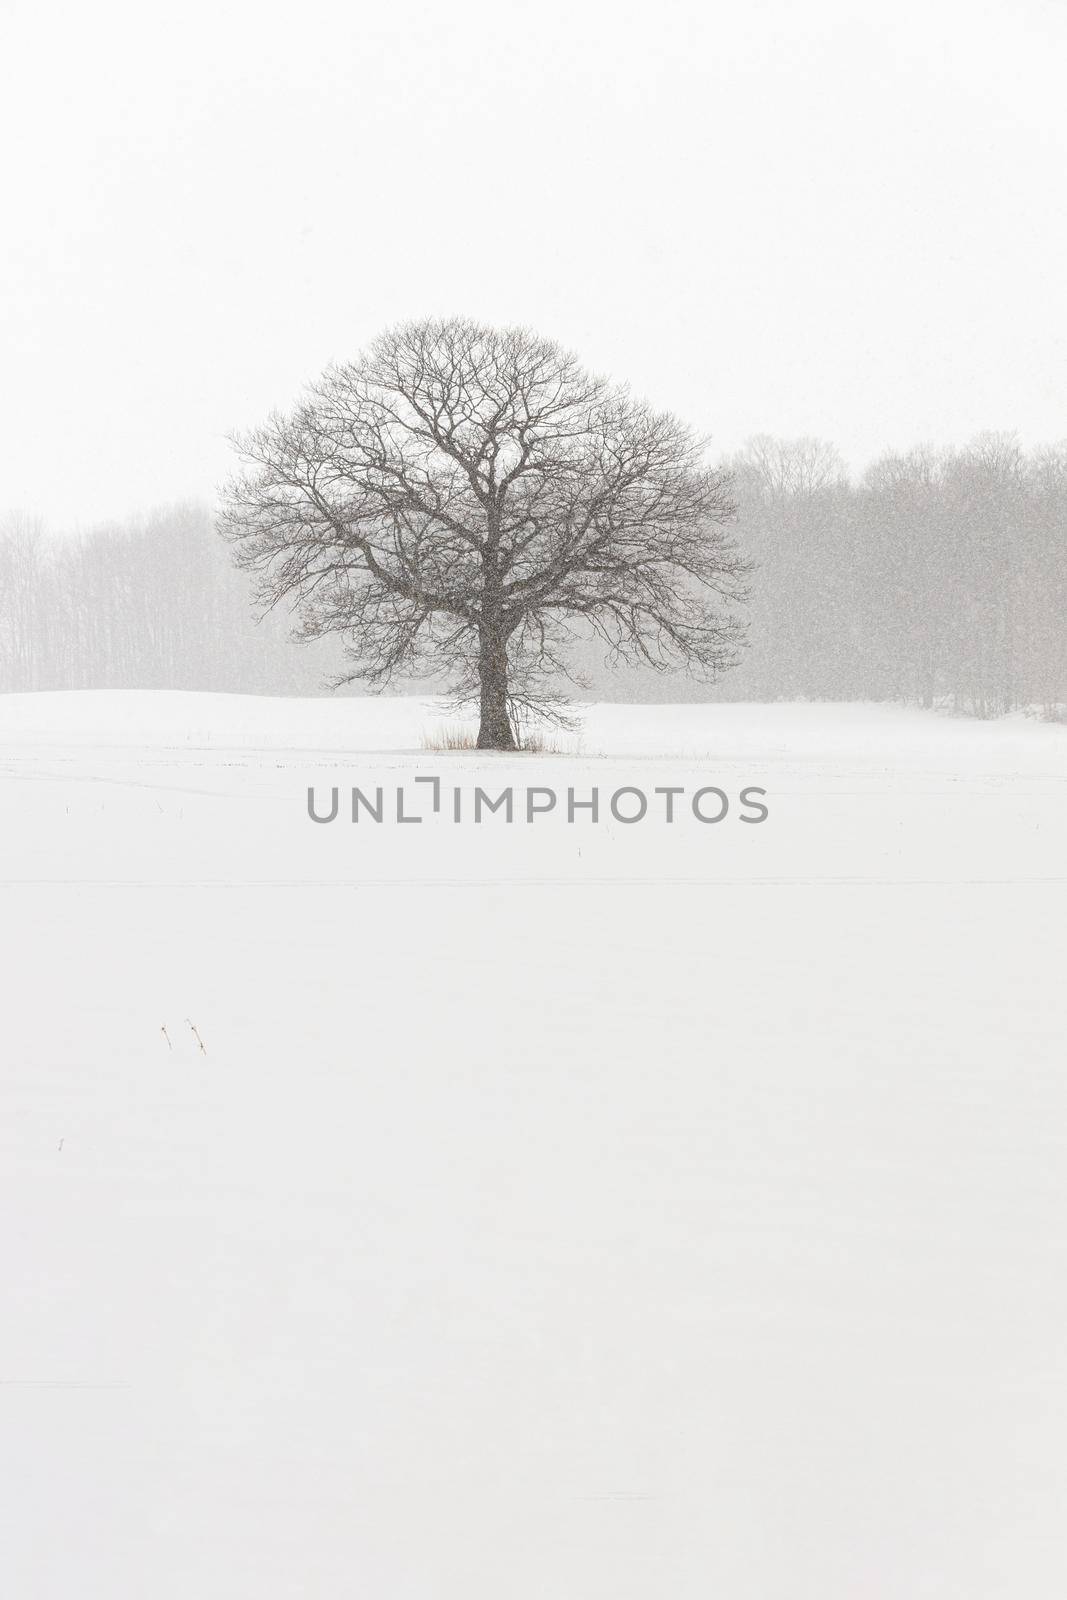 Lone Tree in a Farm Field in a Winter Snow Storm by markvandam